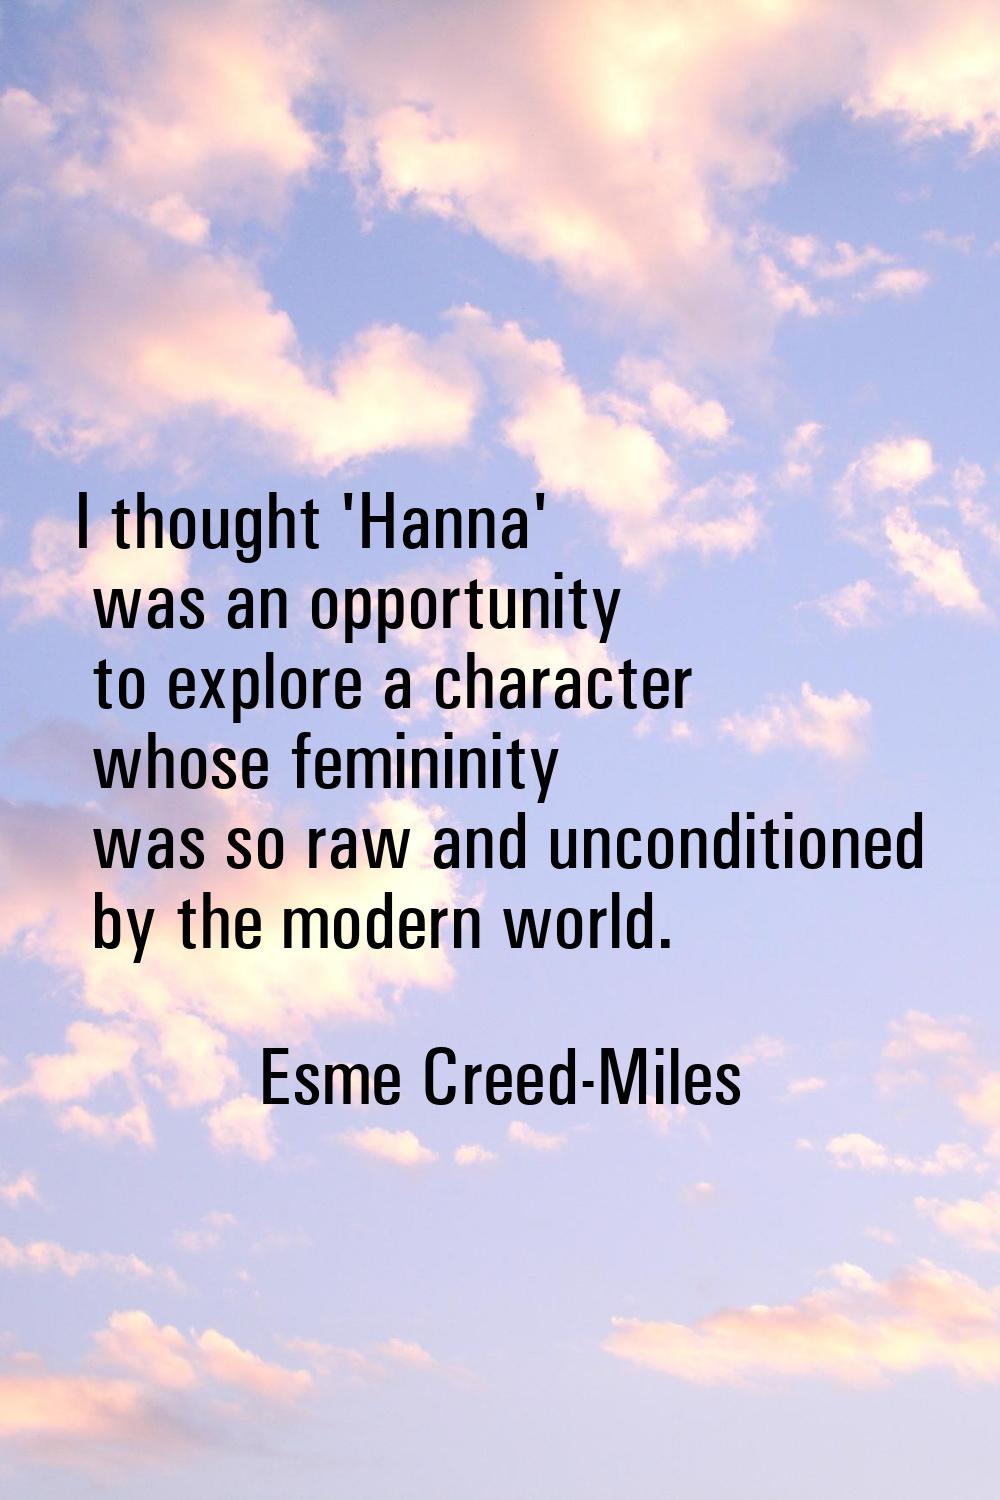 I thought 'Hanna' was an opportunity to explore a character whose femininity was so raw and uncondi